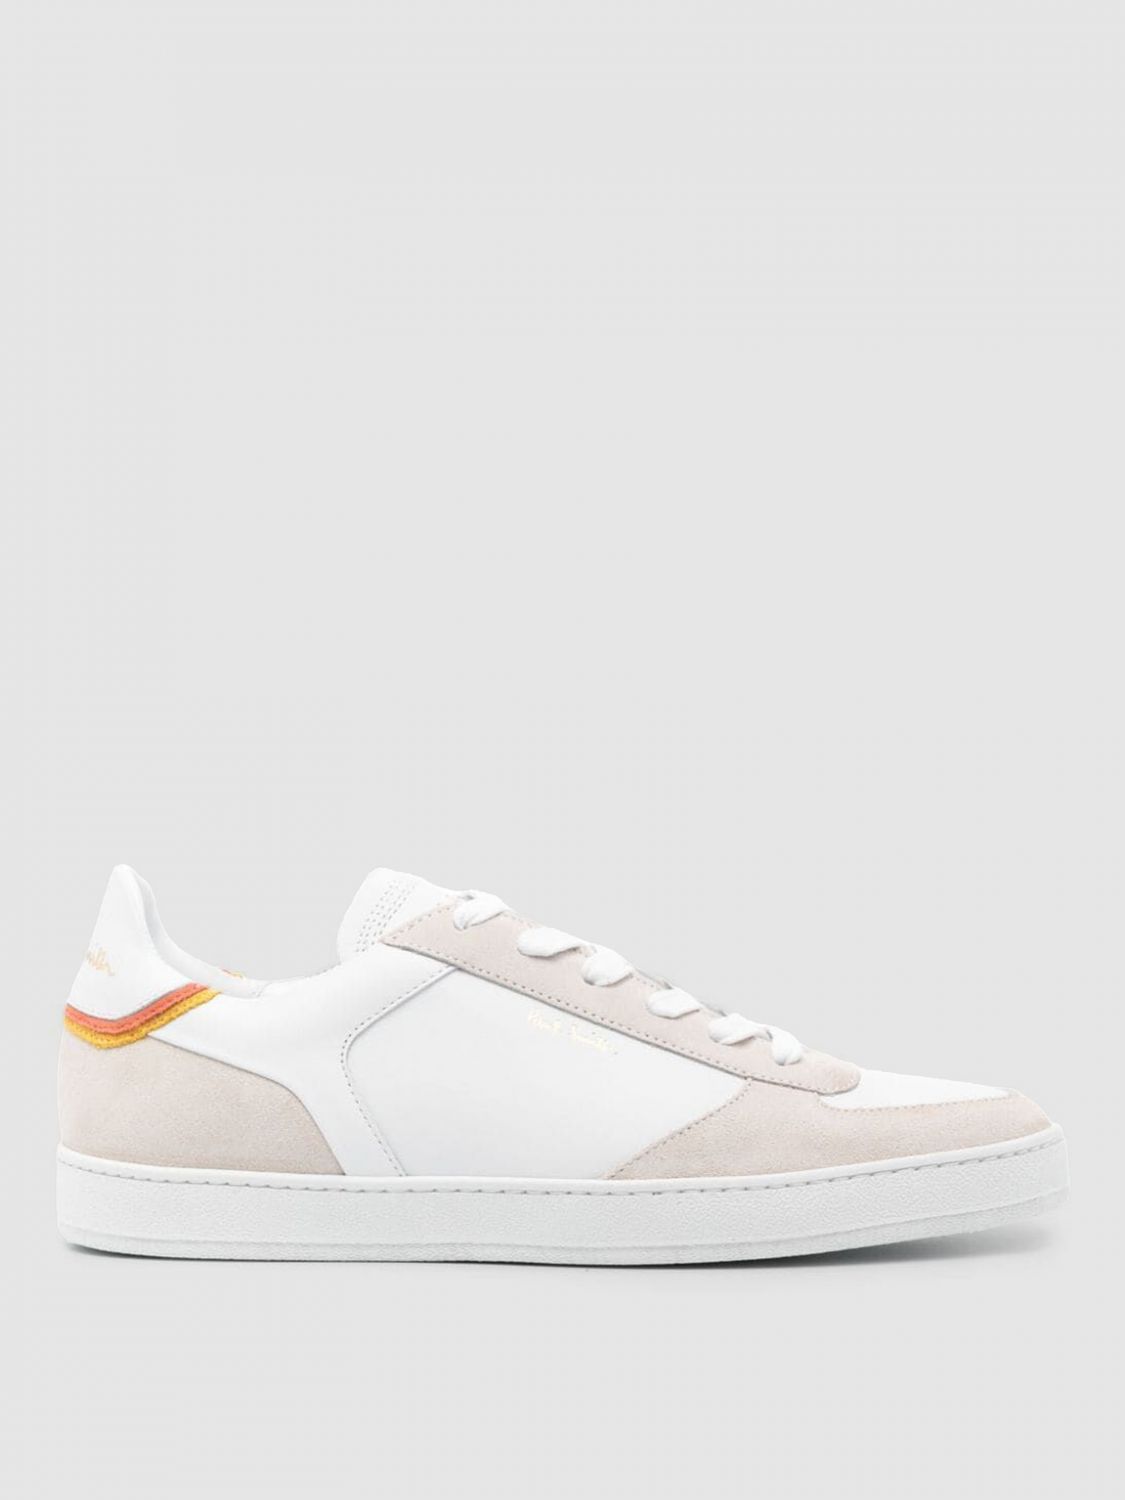 Paul Smith Sneakers PAUL SMITH Men color White